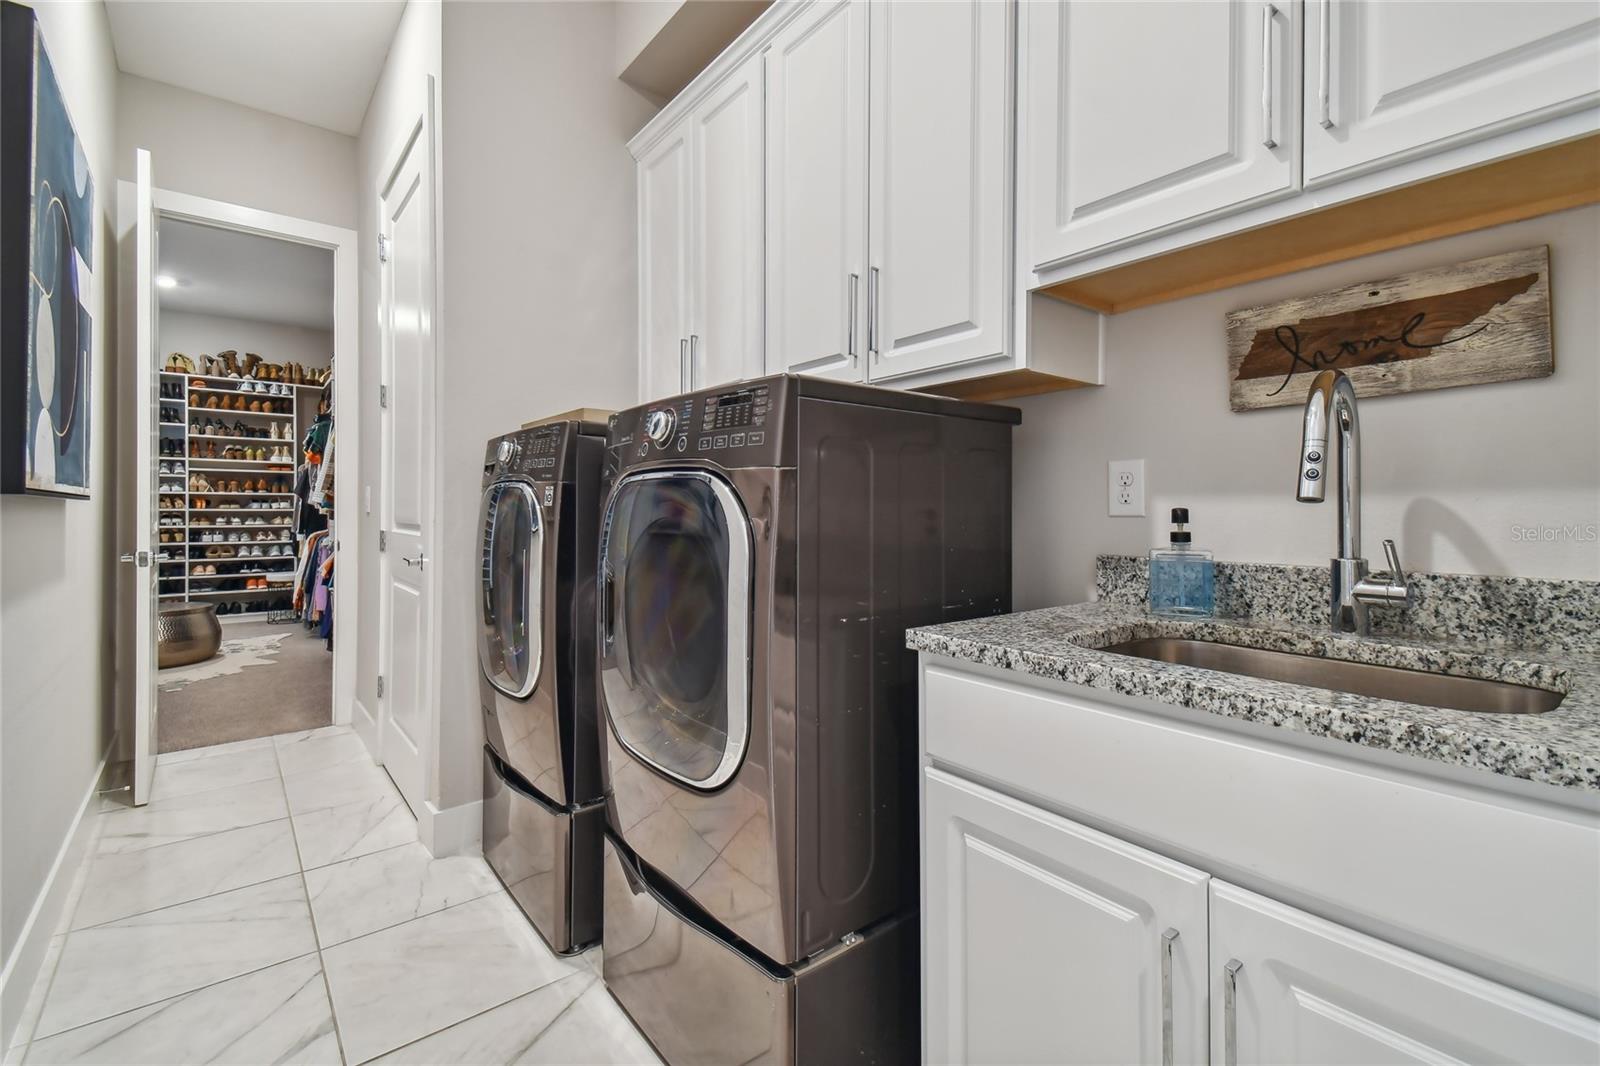 Laundry Room - Access to Primary Closet